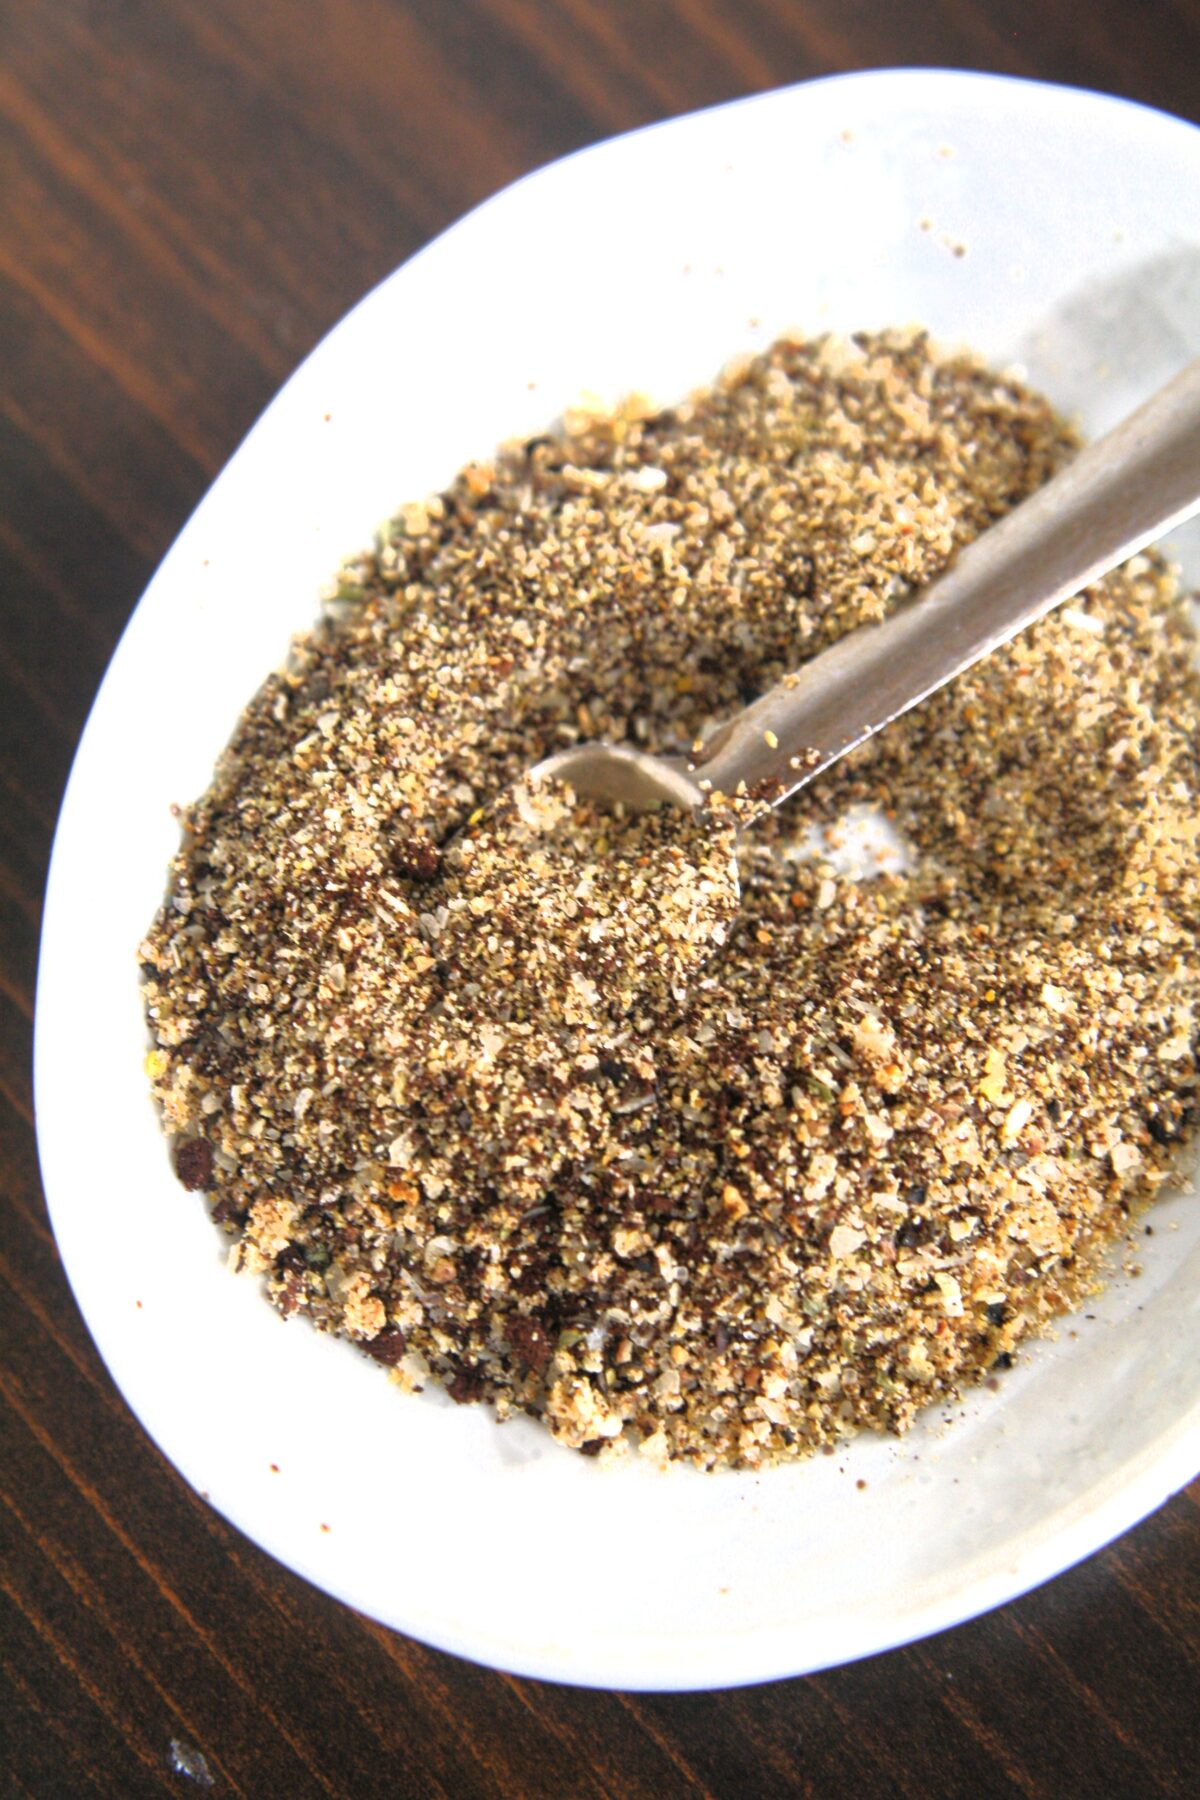 If you're a fan of smoky, flavorful brisket, then you've to try this coffee dry rub which will take your brisket to the next level. Get ready to impress your friends and family with the most delicious and tender brisket they've ever tasted!